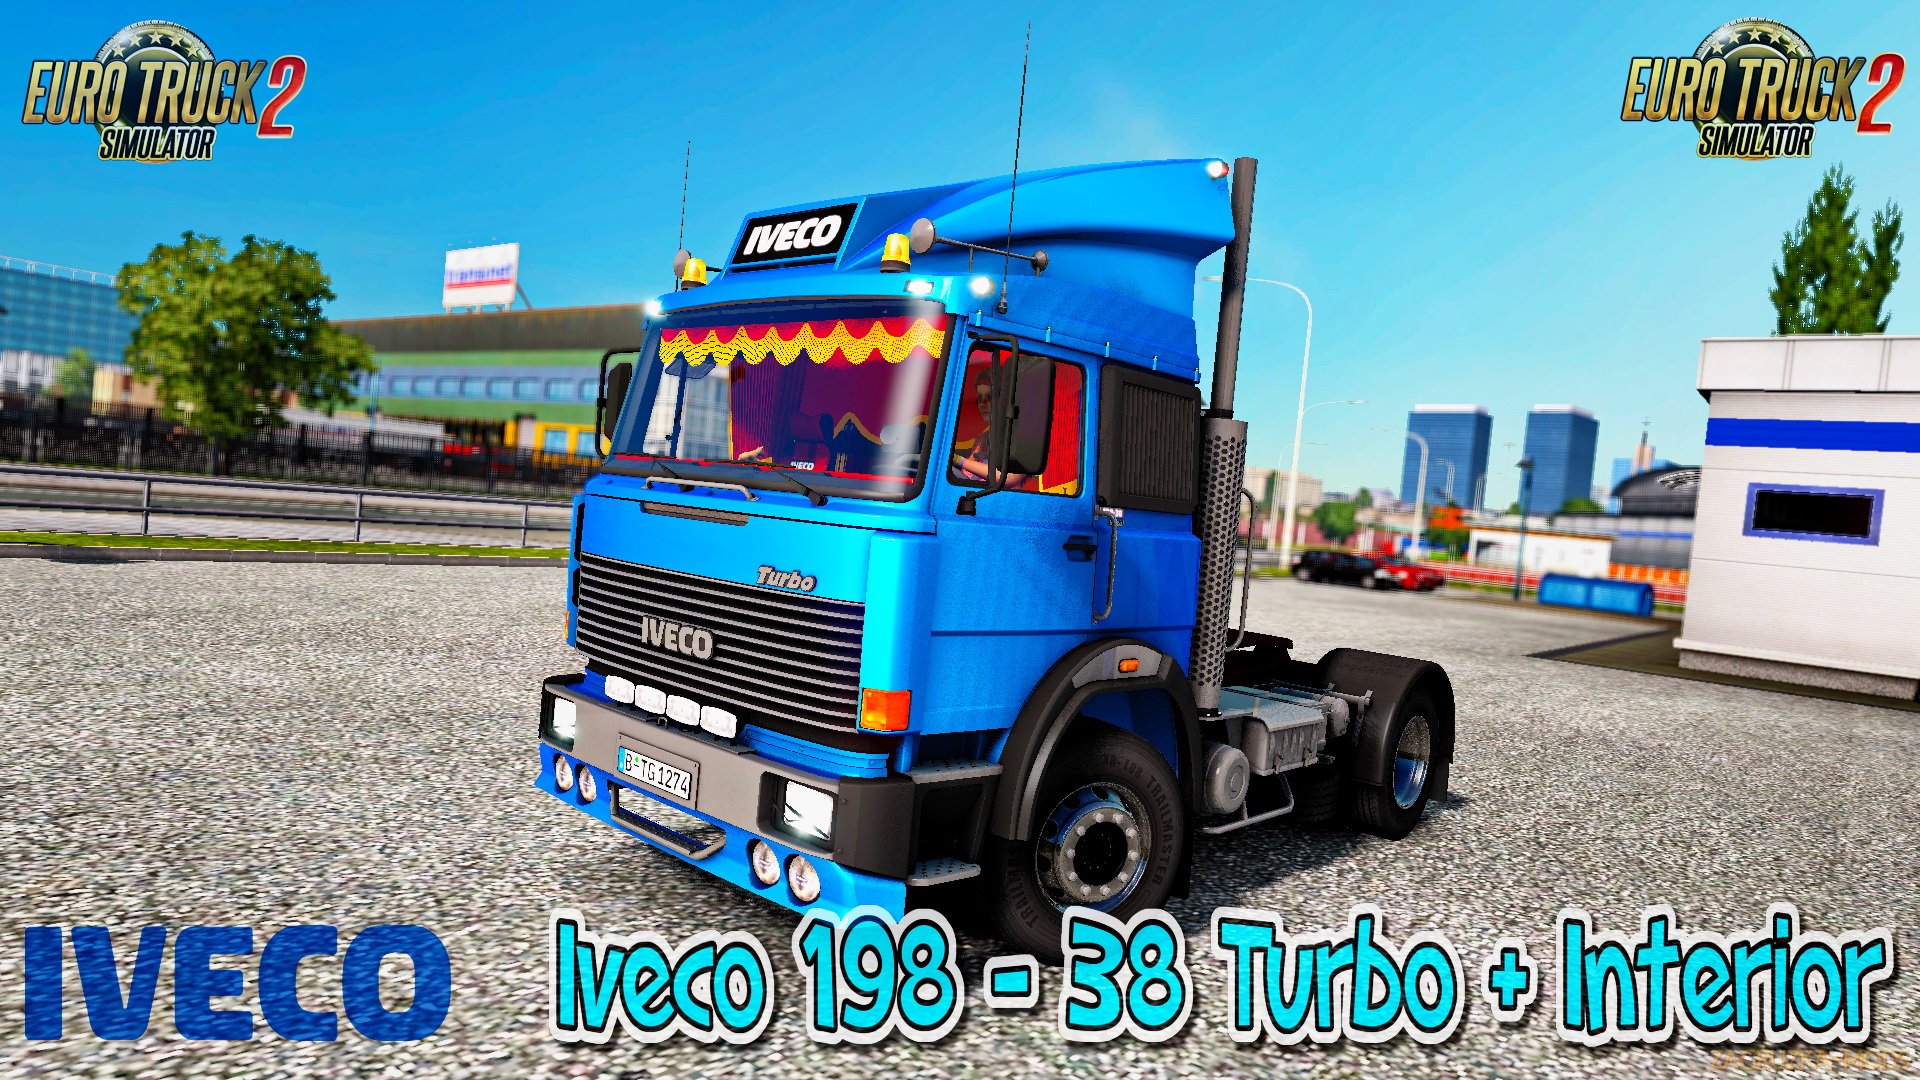 Iveco 198 - 38 Turbo + Interior v1.1 (1.26.x) for ETS 2